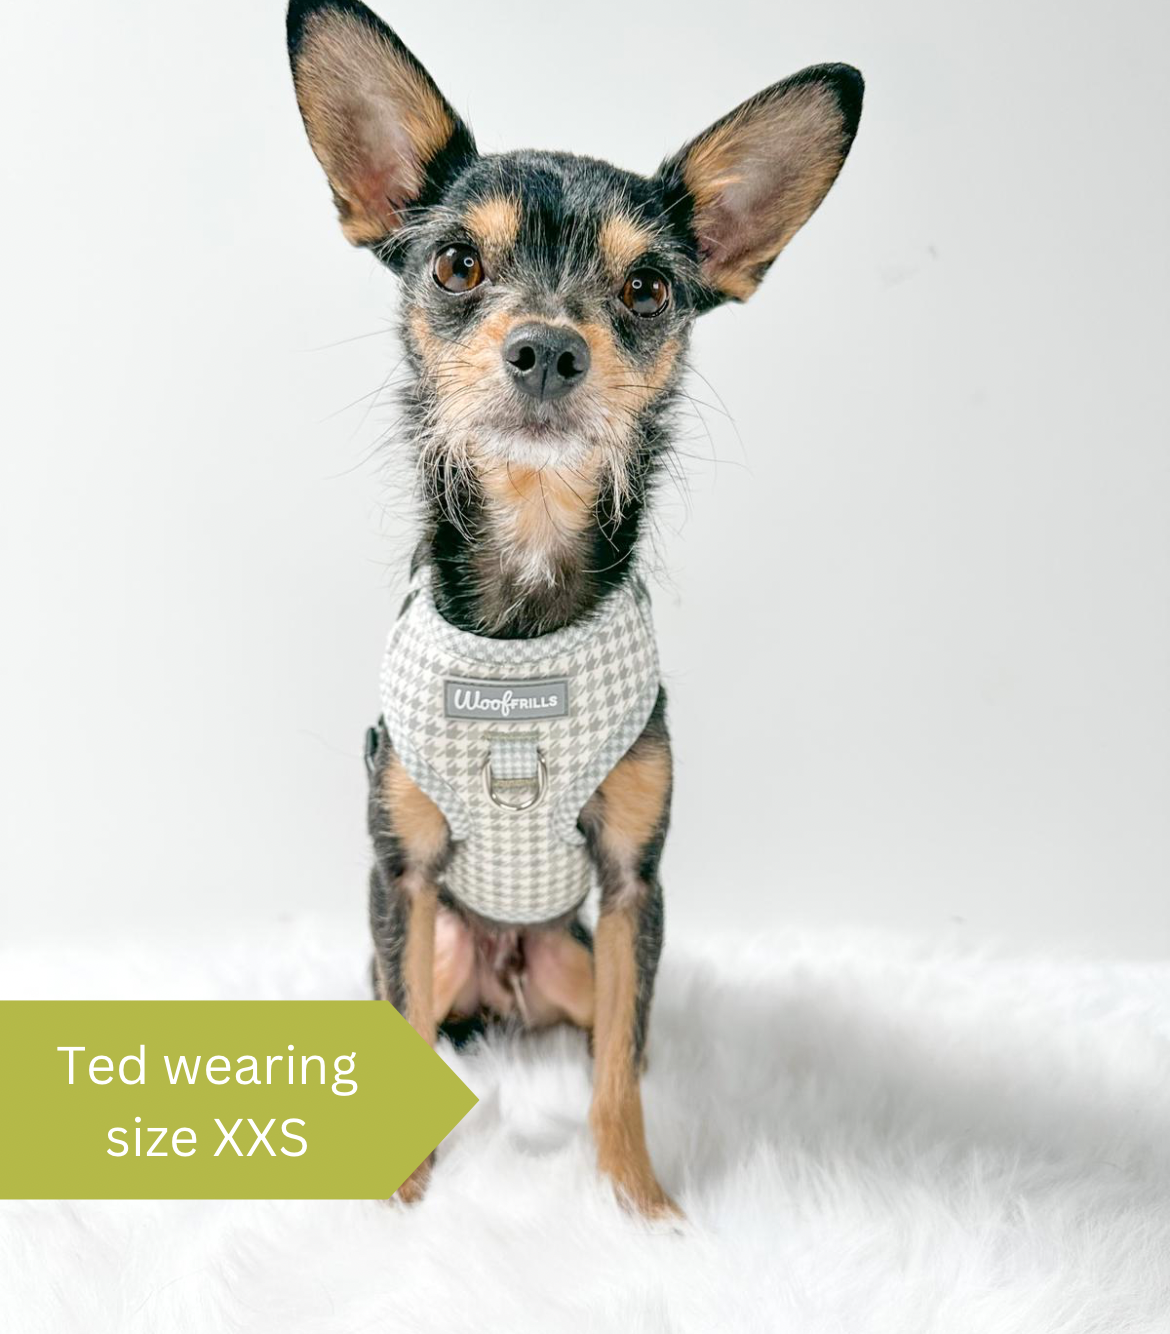 Ted wearing a houndstooth harness for small dogs